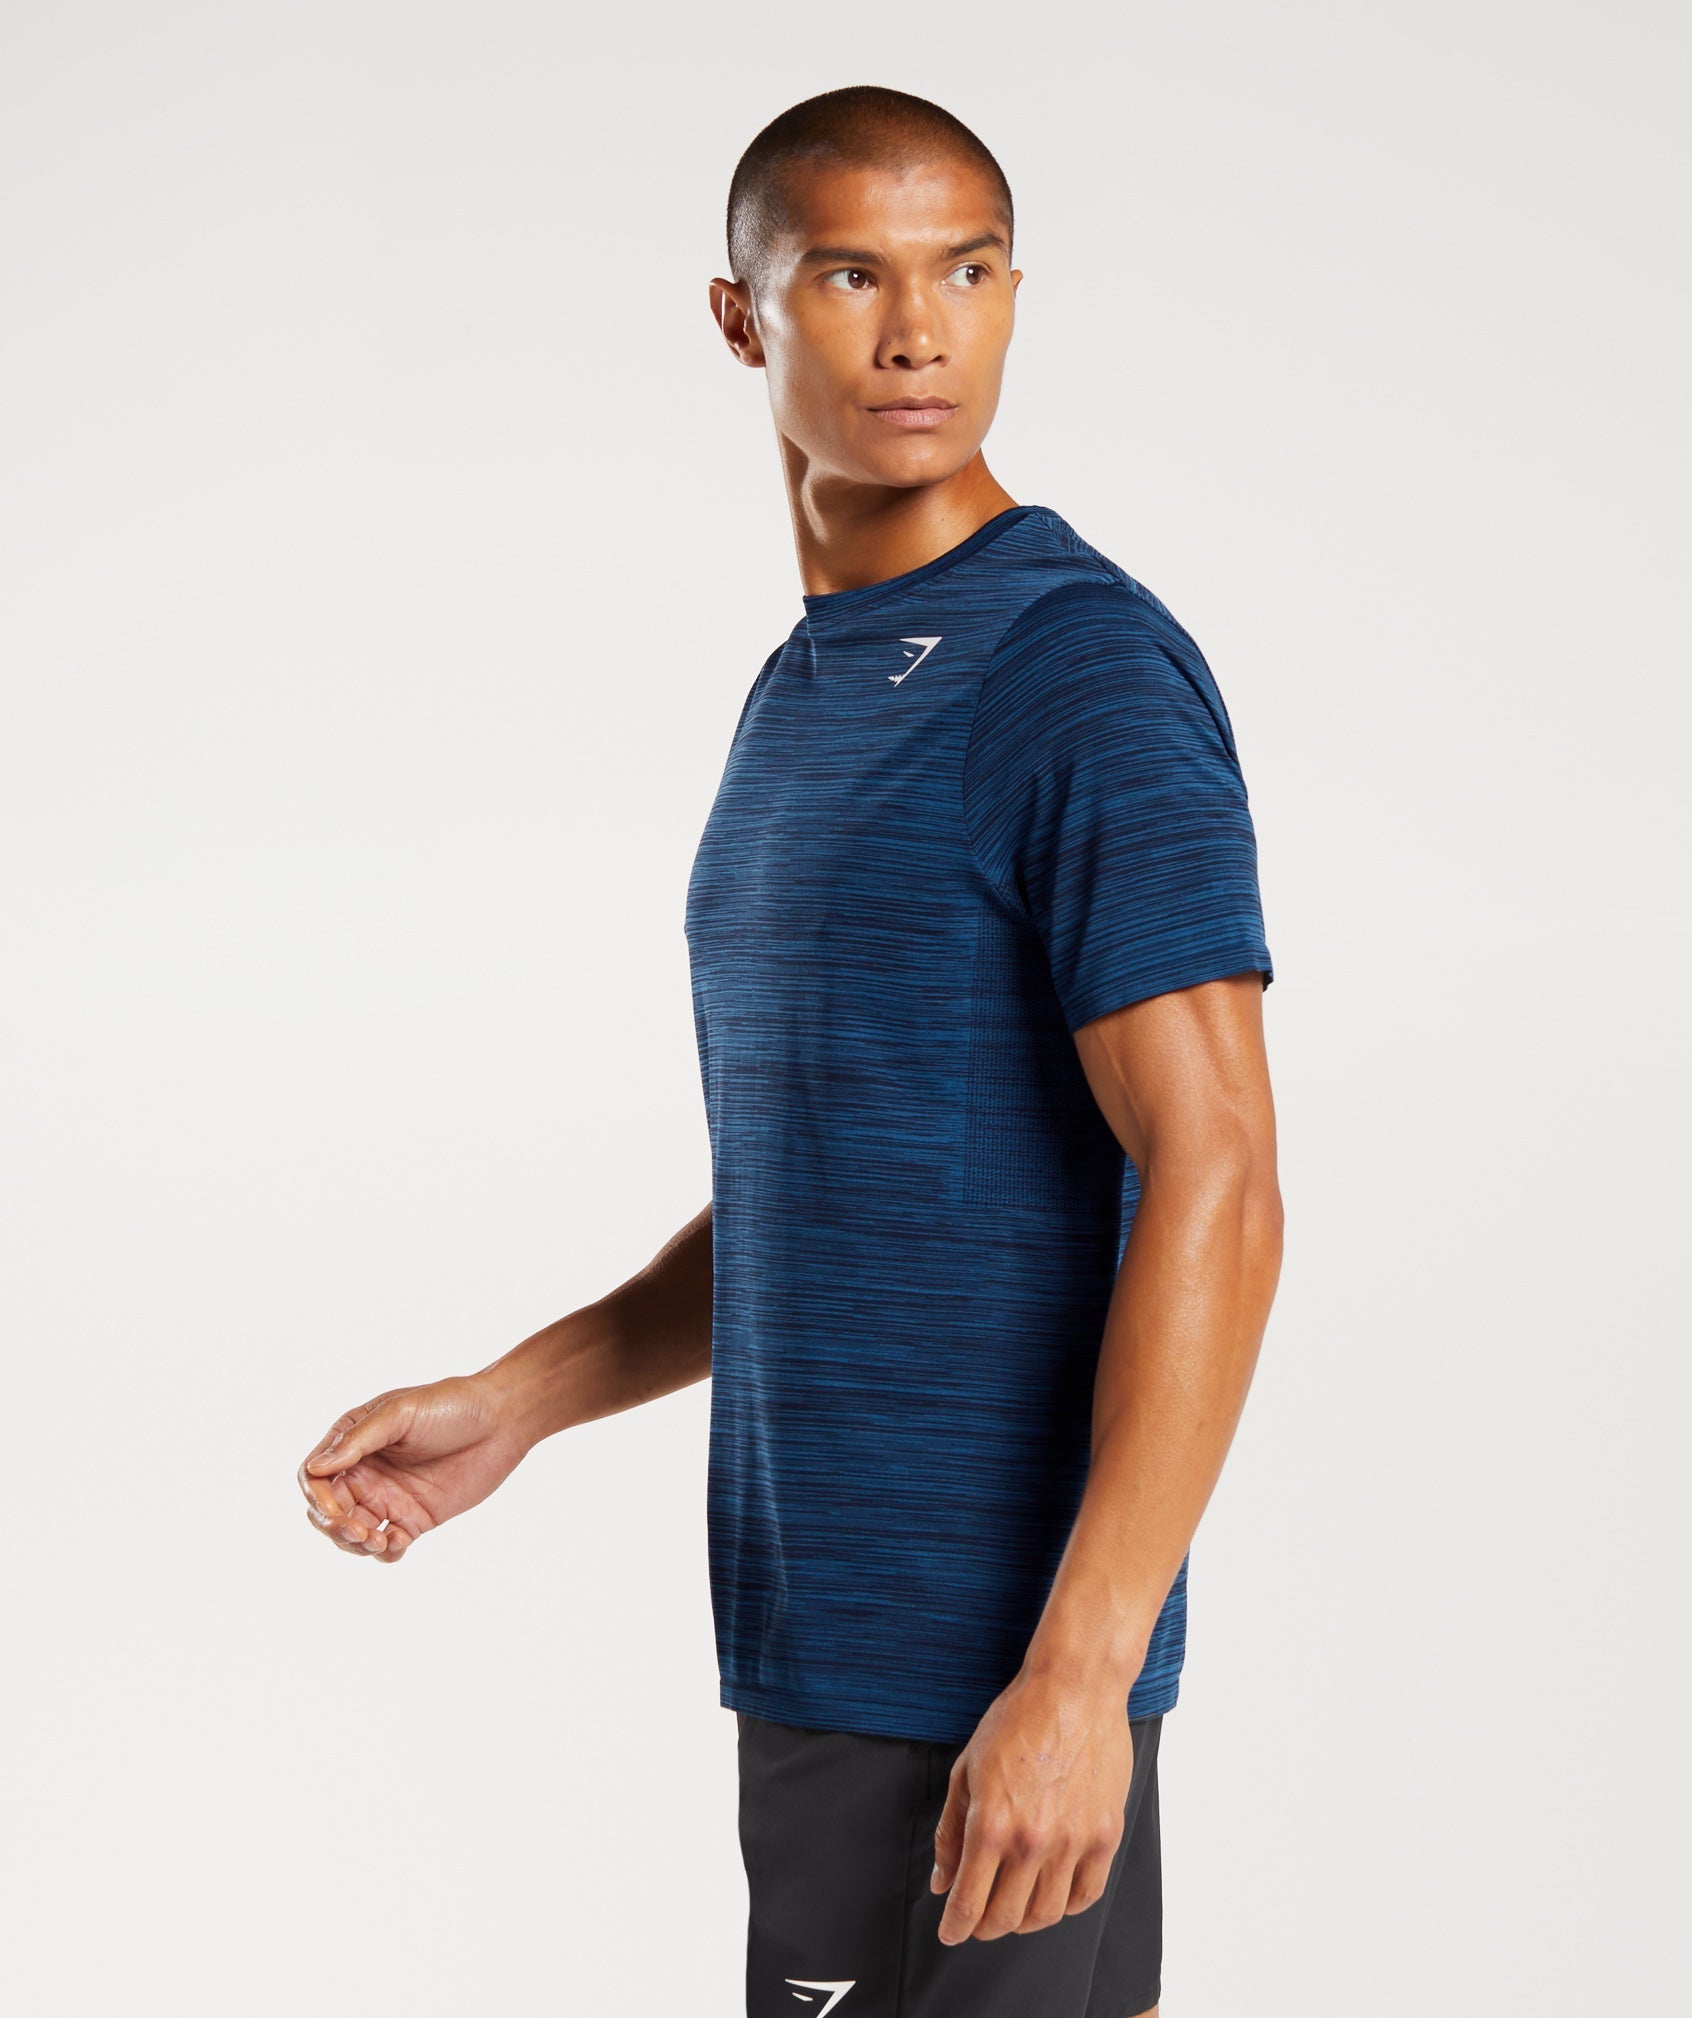 Heather Seamless T-Shirt in Navy/Core Blue Marl - view 3